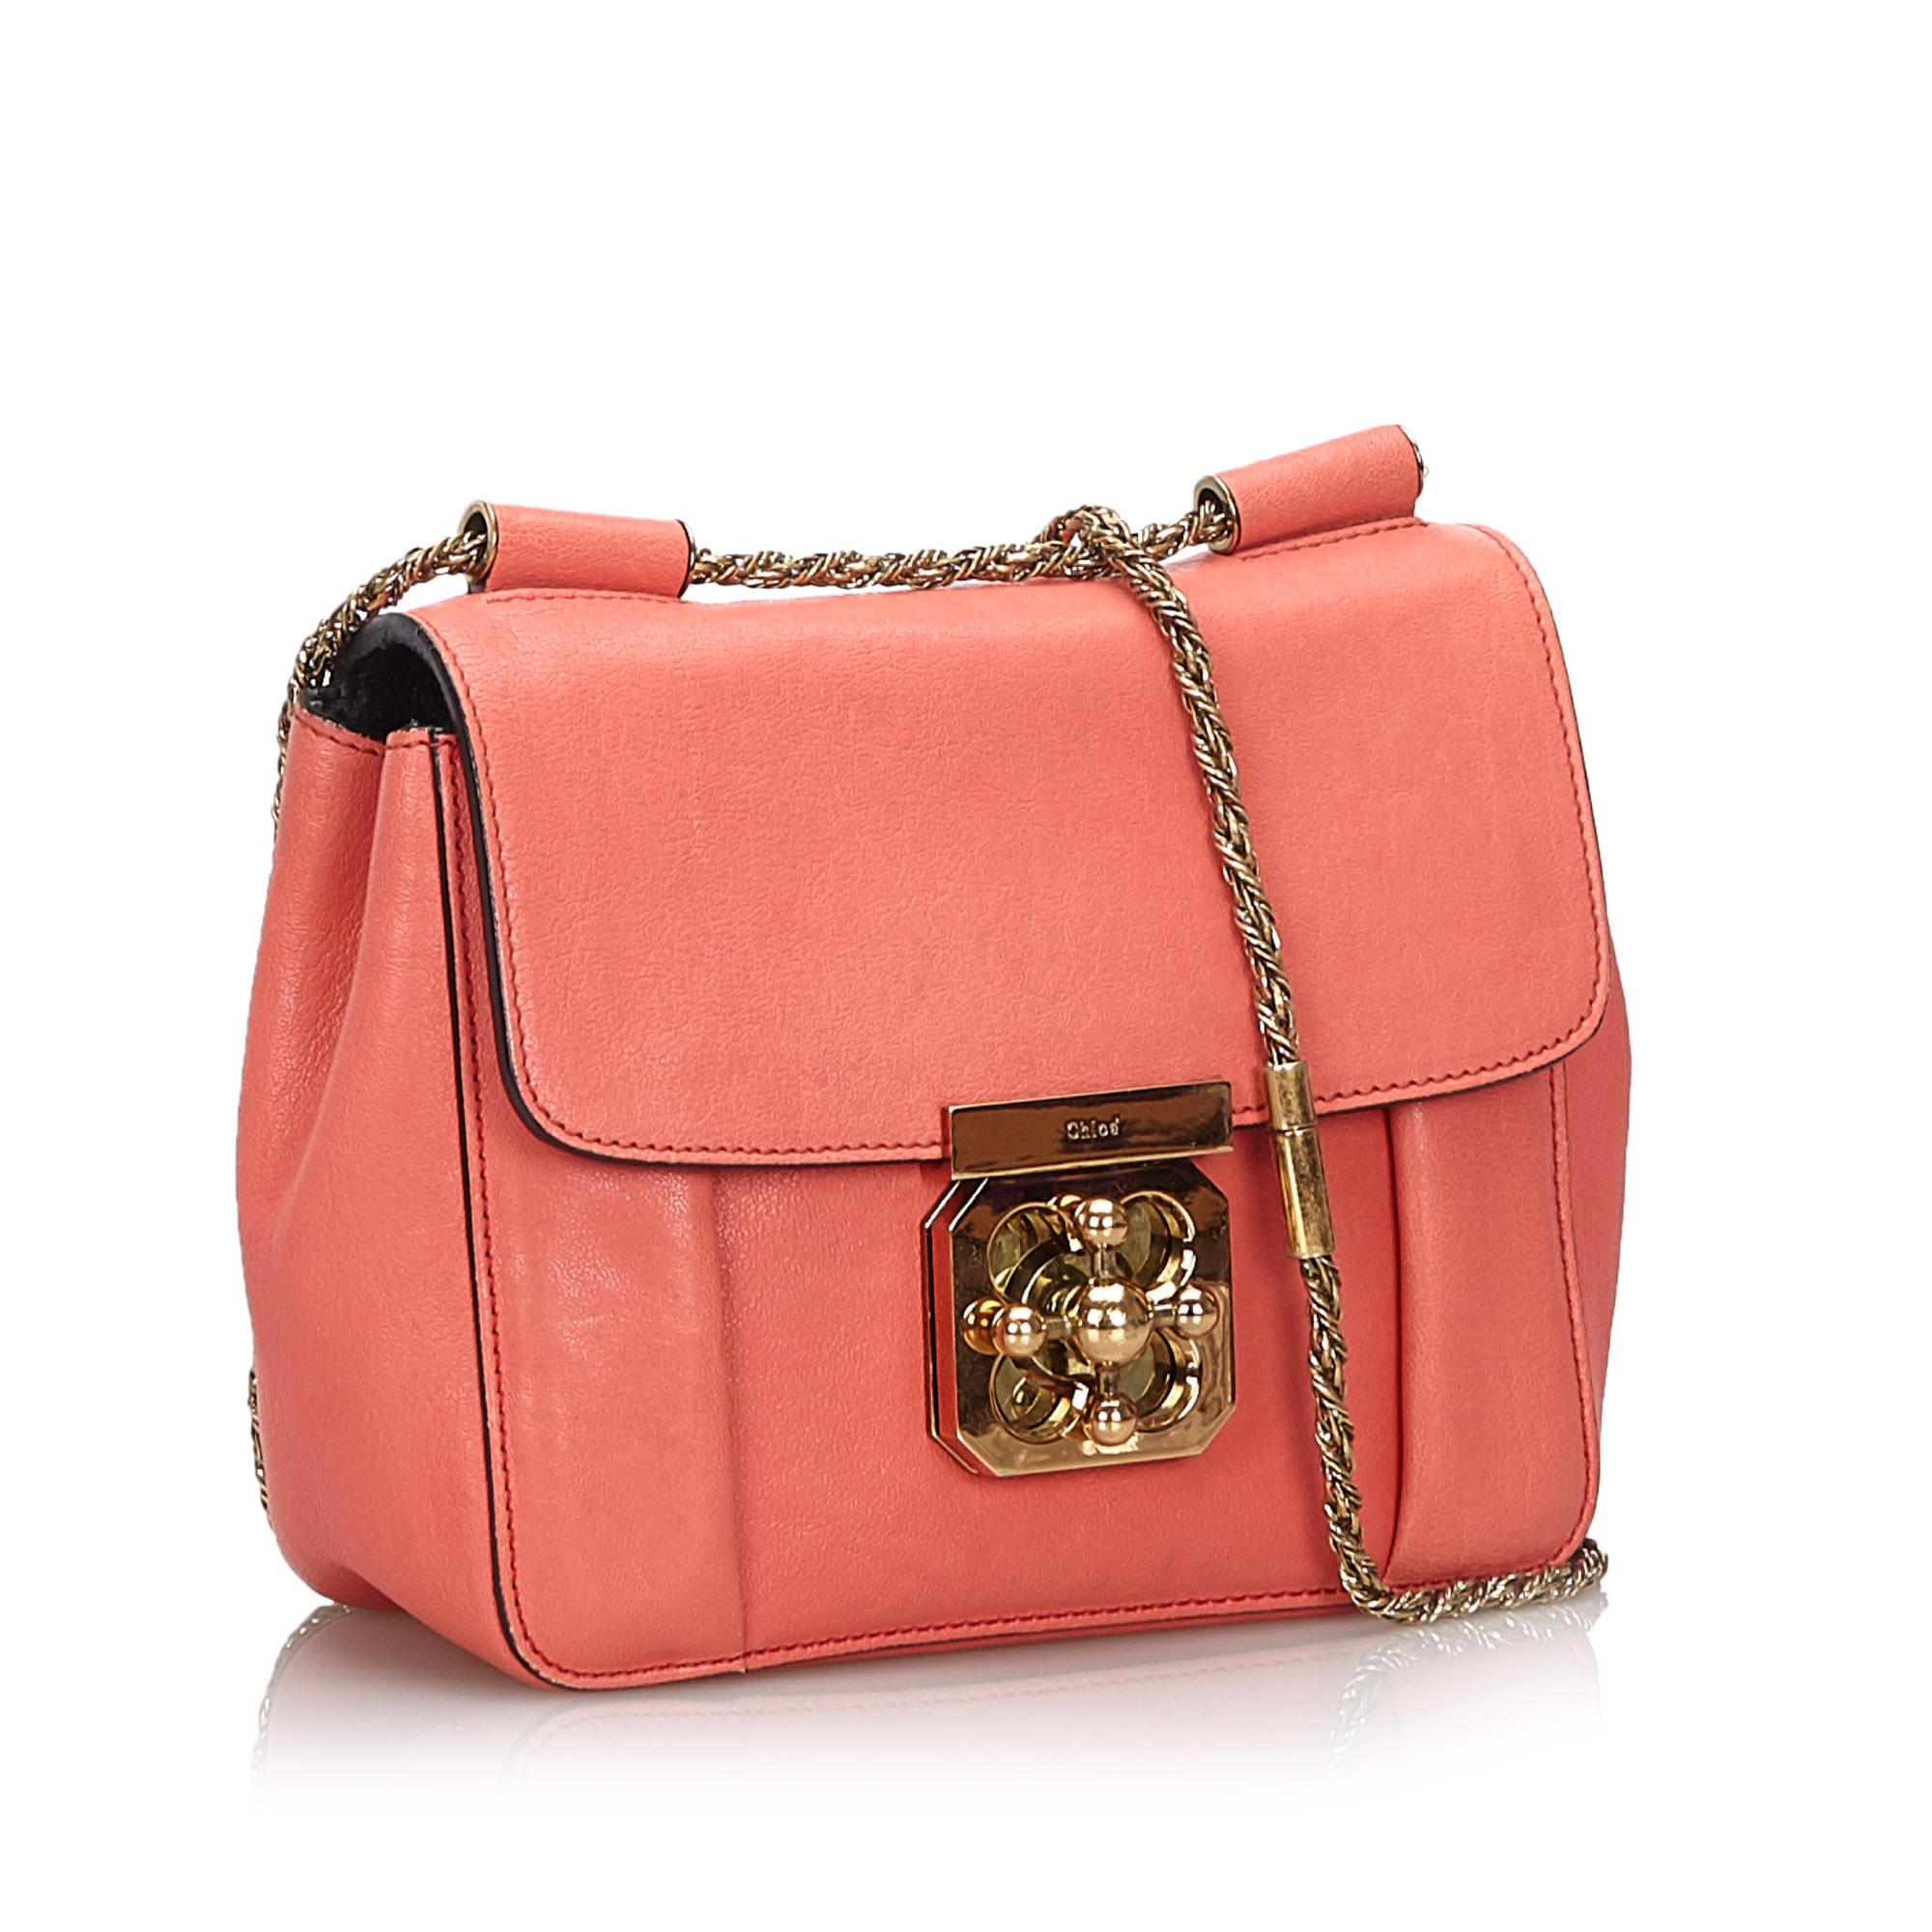 The Elsie shoulder bag features a leather body, chain link straps, a top flap with a twist lock closure, and an interior slip pocket. It carries as B+ condition rating.

Inclusions: 
This item does not come with inclusions.

Dimensions:
Length: